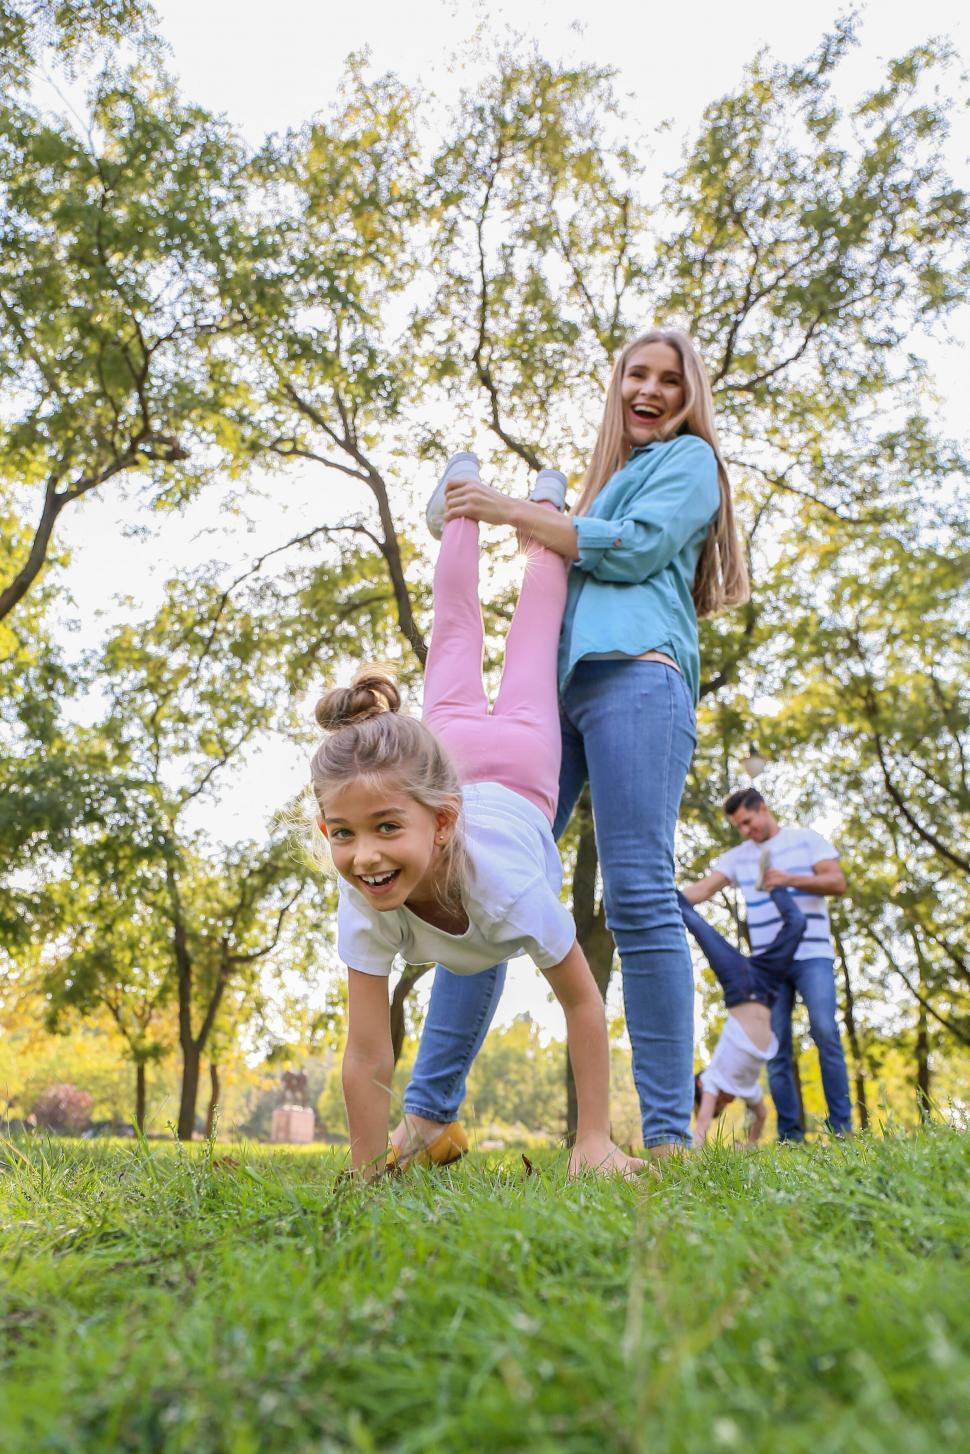 Free Image of Playful family game in the park 